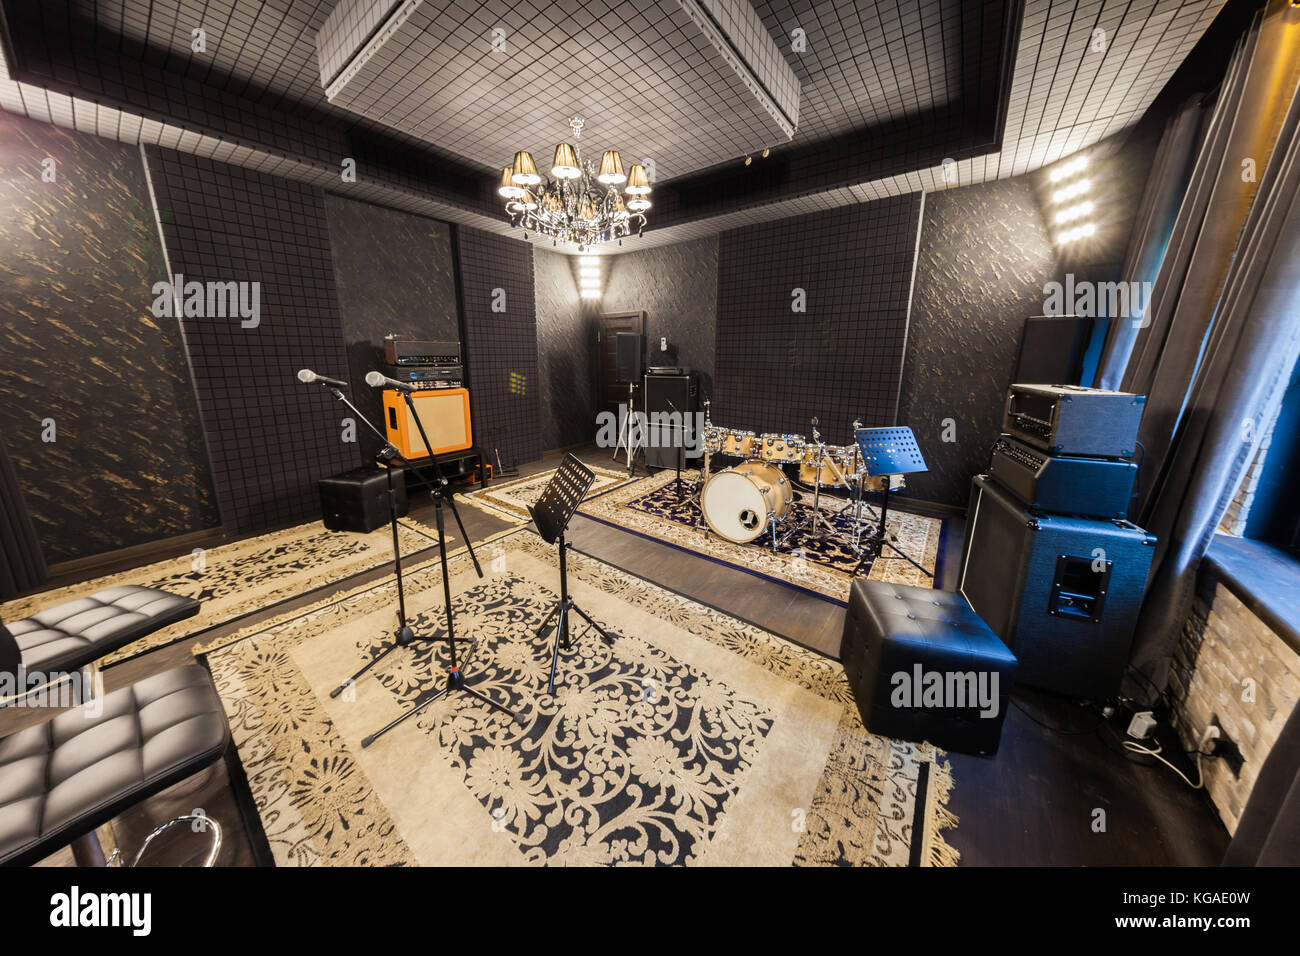 professional recording studio with musical instruments Stock Photo